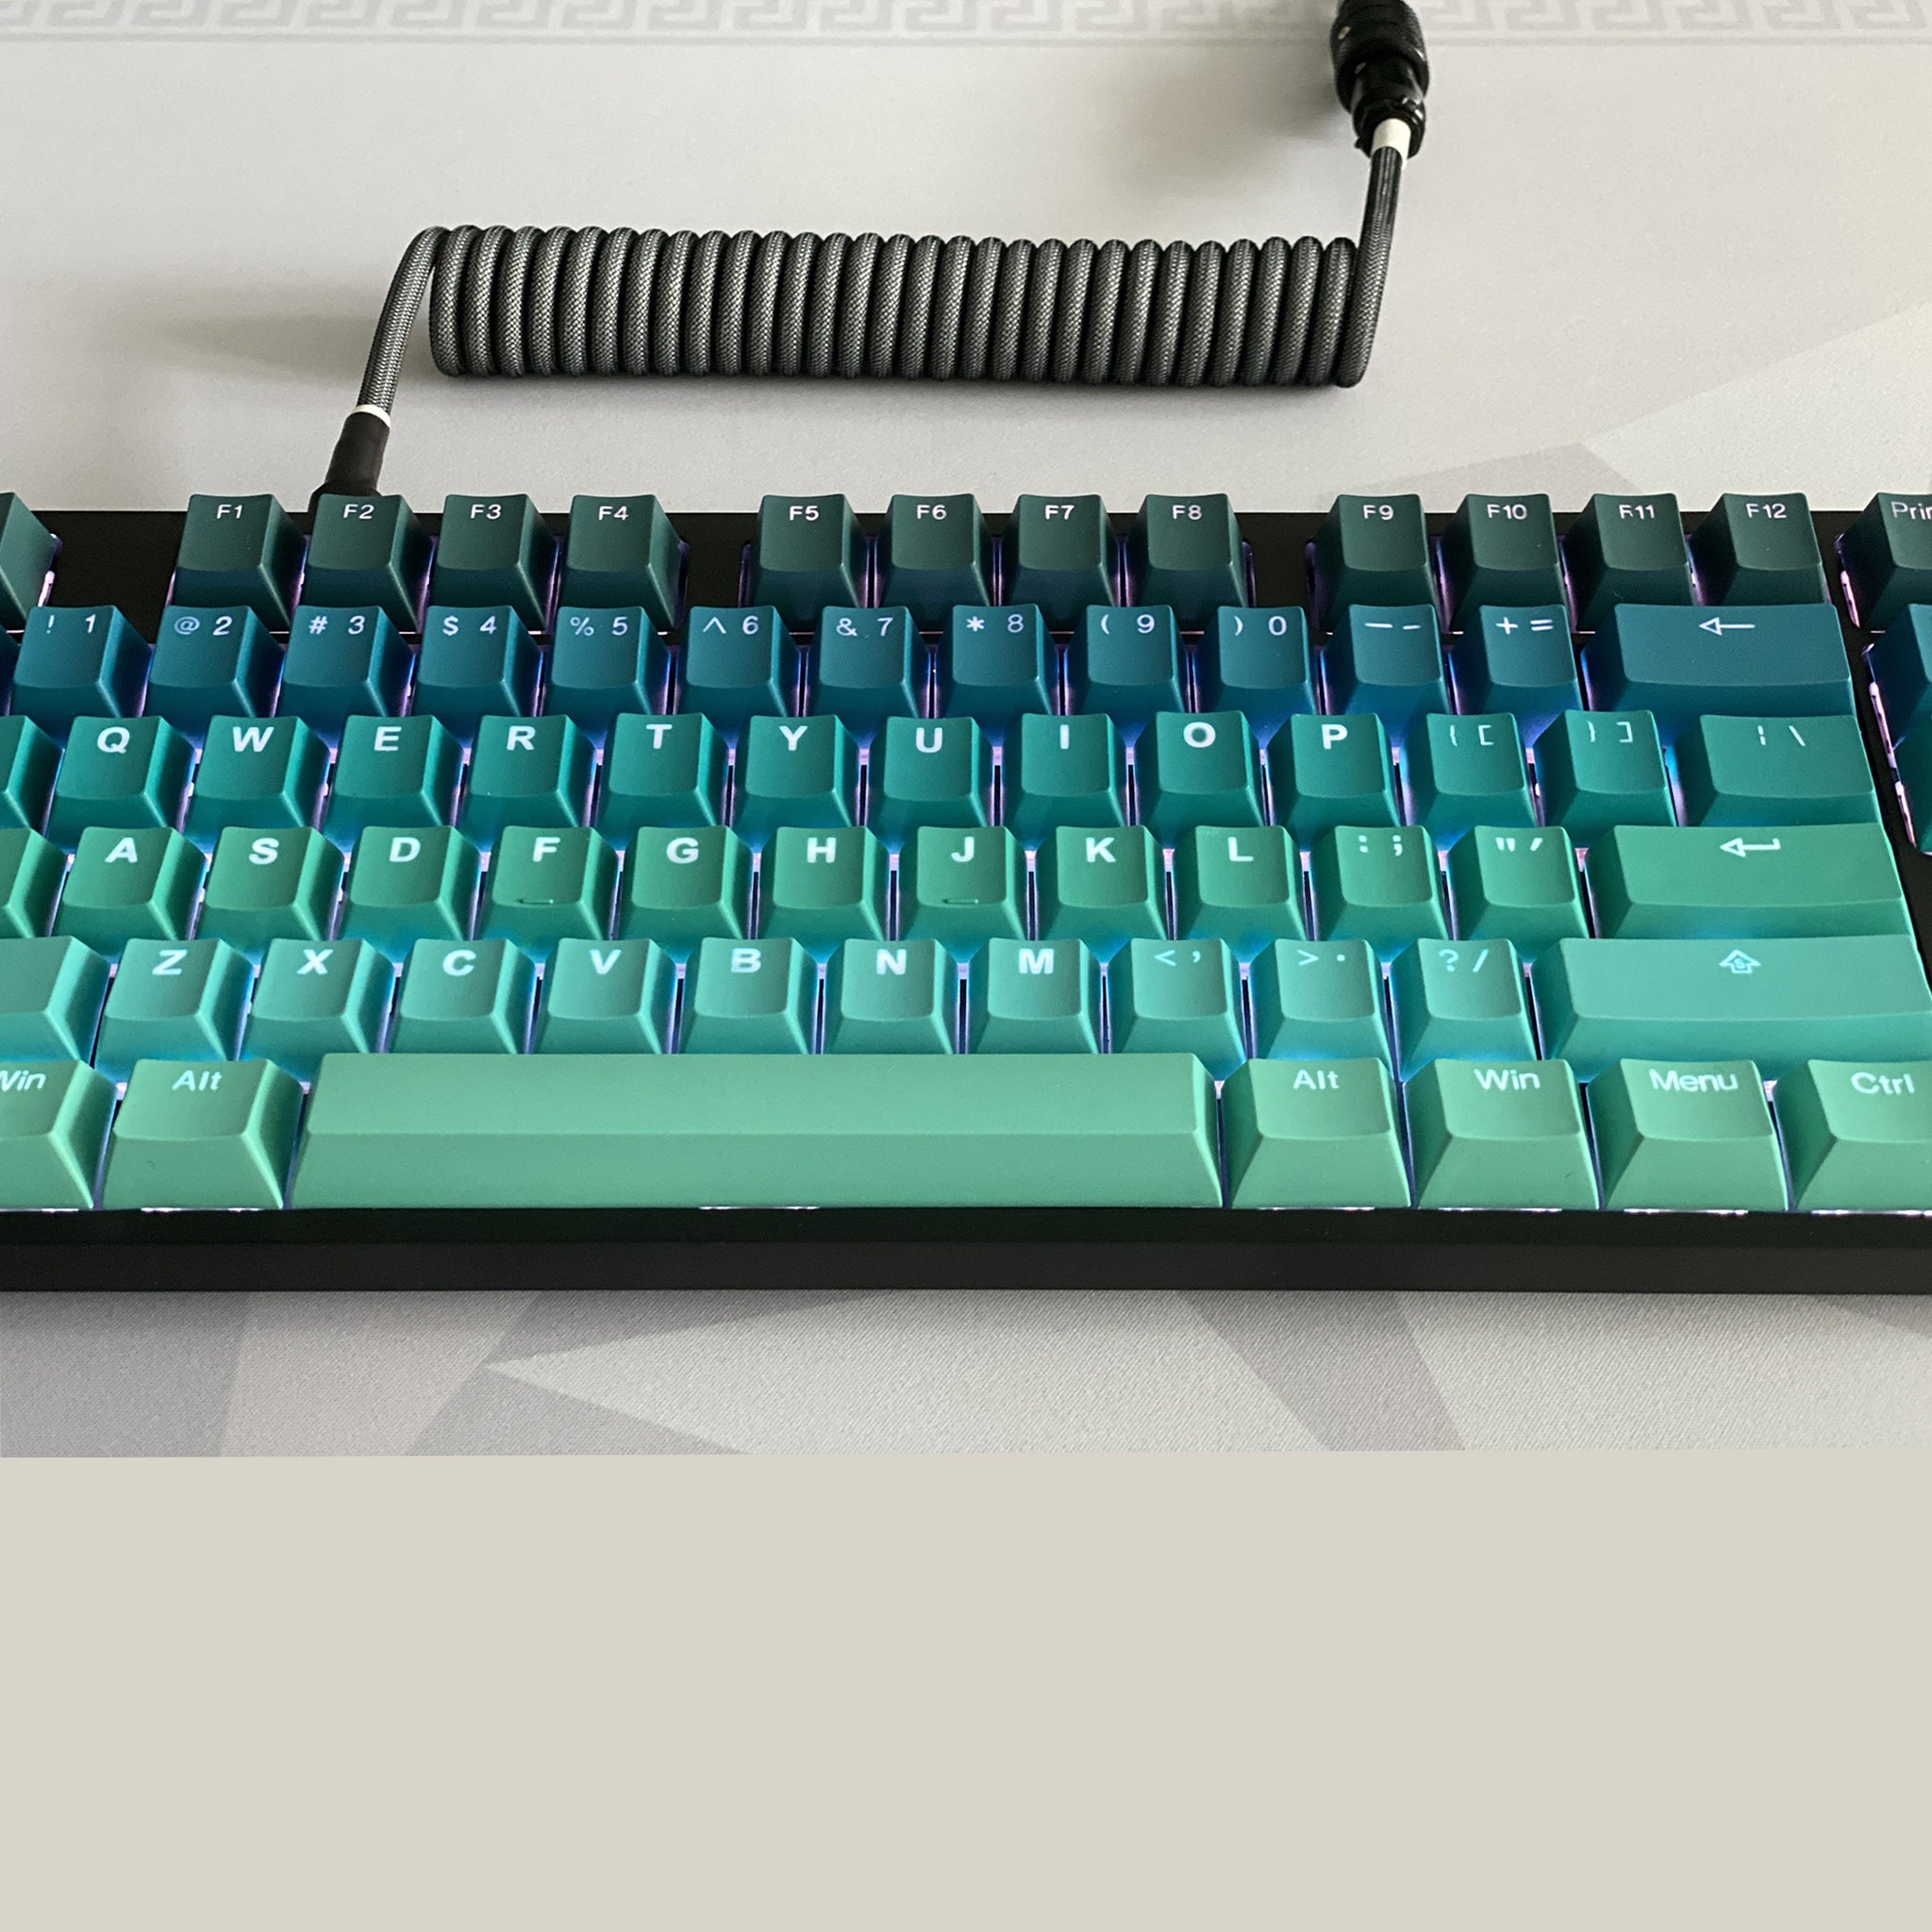 View of the Wired Mykonos Keychron C2 by tai hao with type C output. RGB back lightning and ANSI Layout with ABS used as frame material.